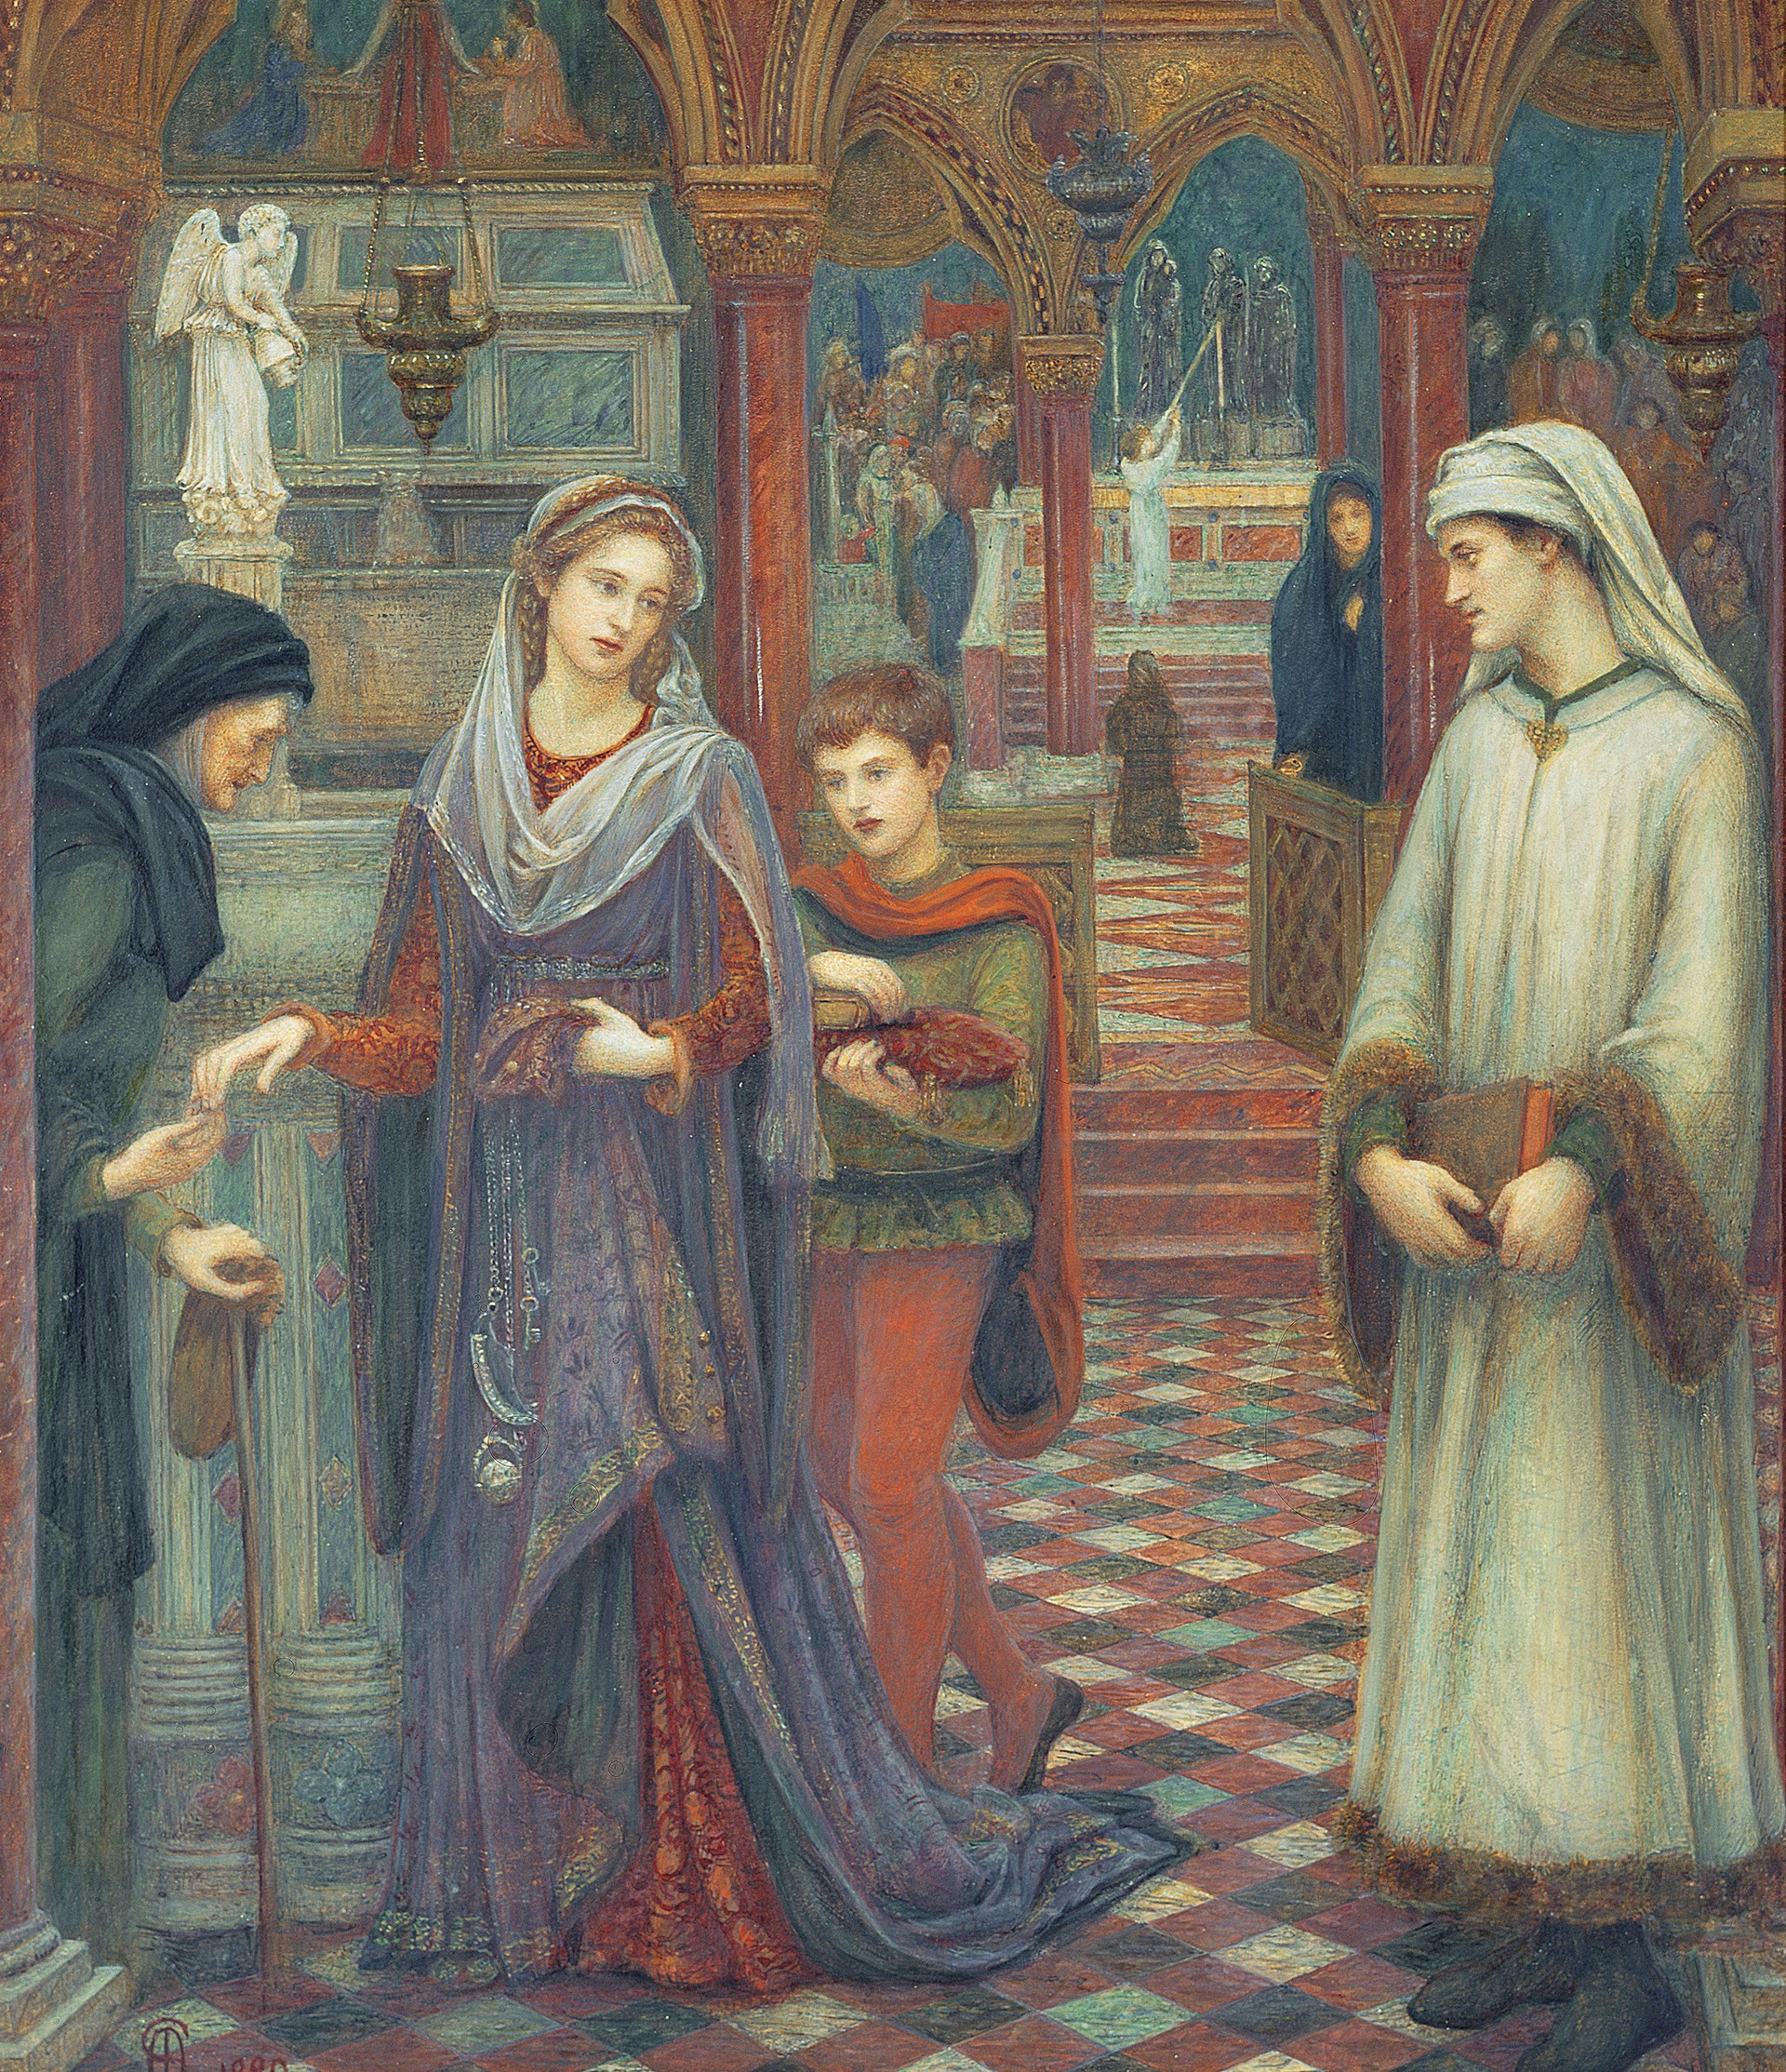 Marie Spartali Stillman - The First Meeting of Petrarch and Laura